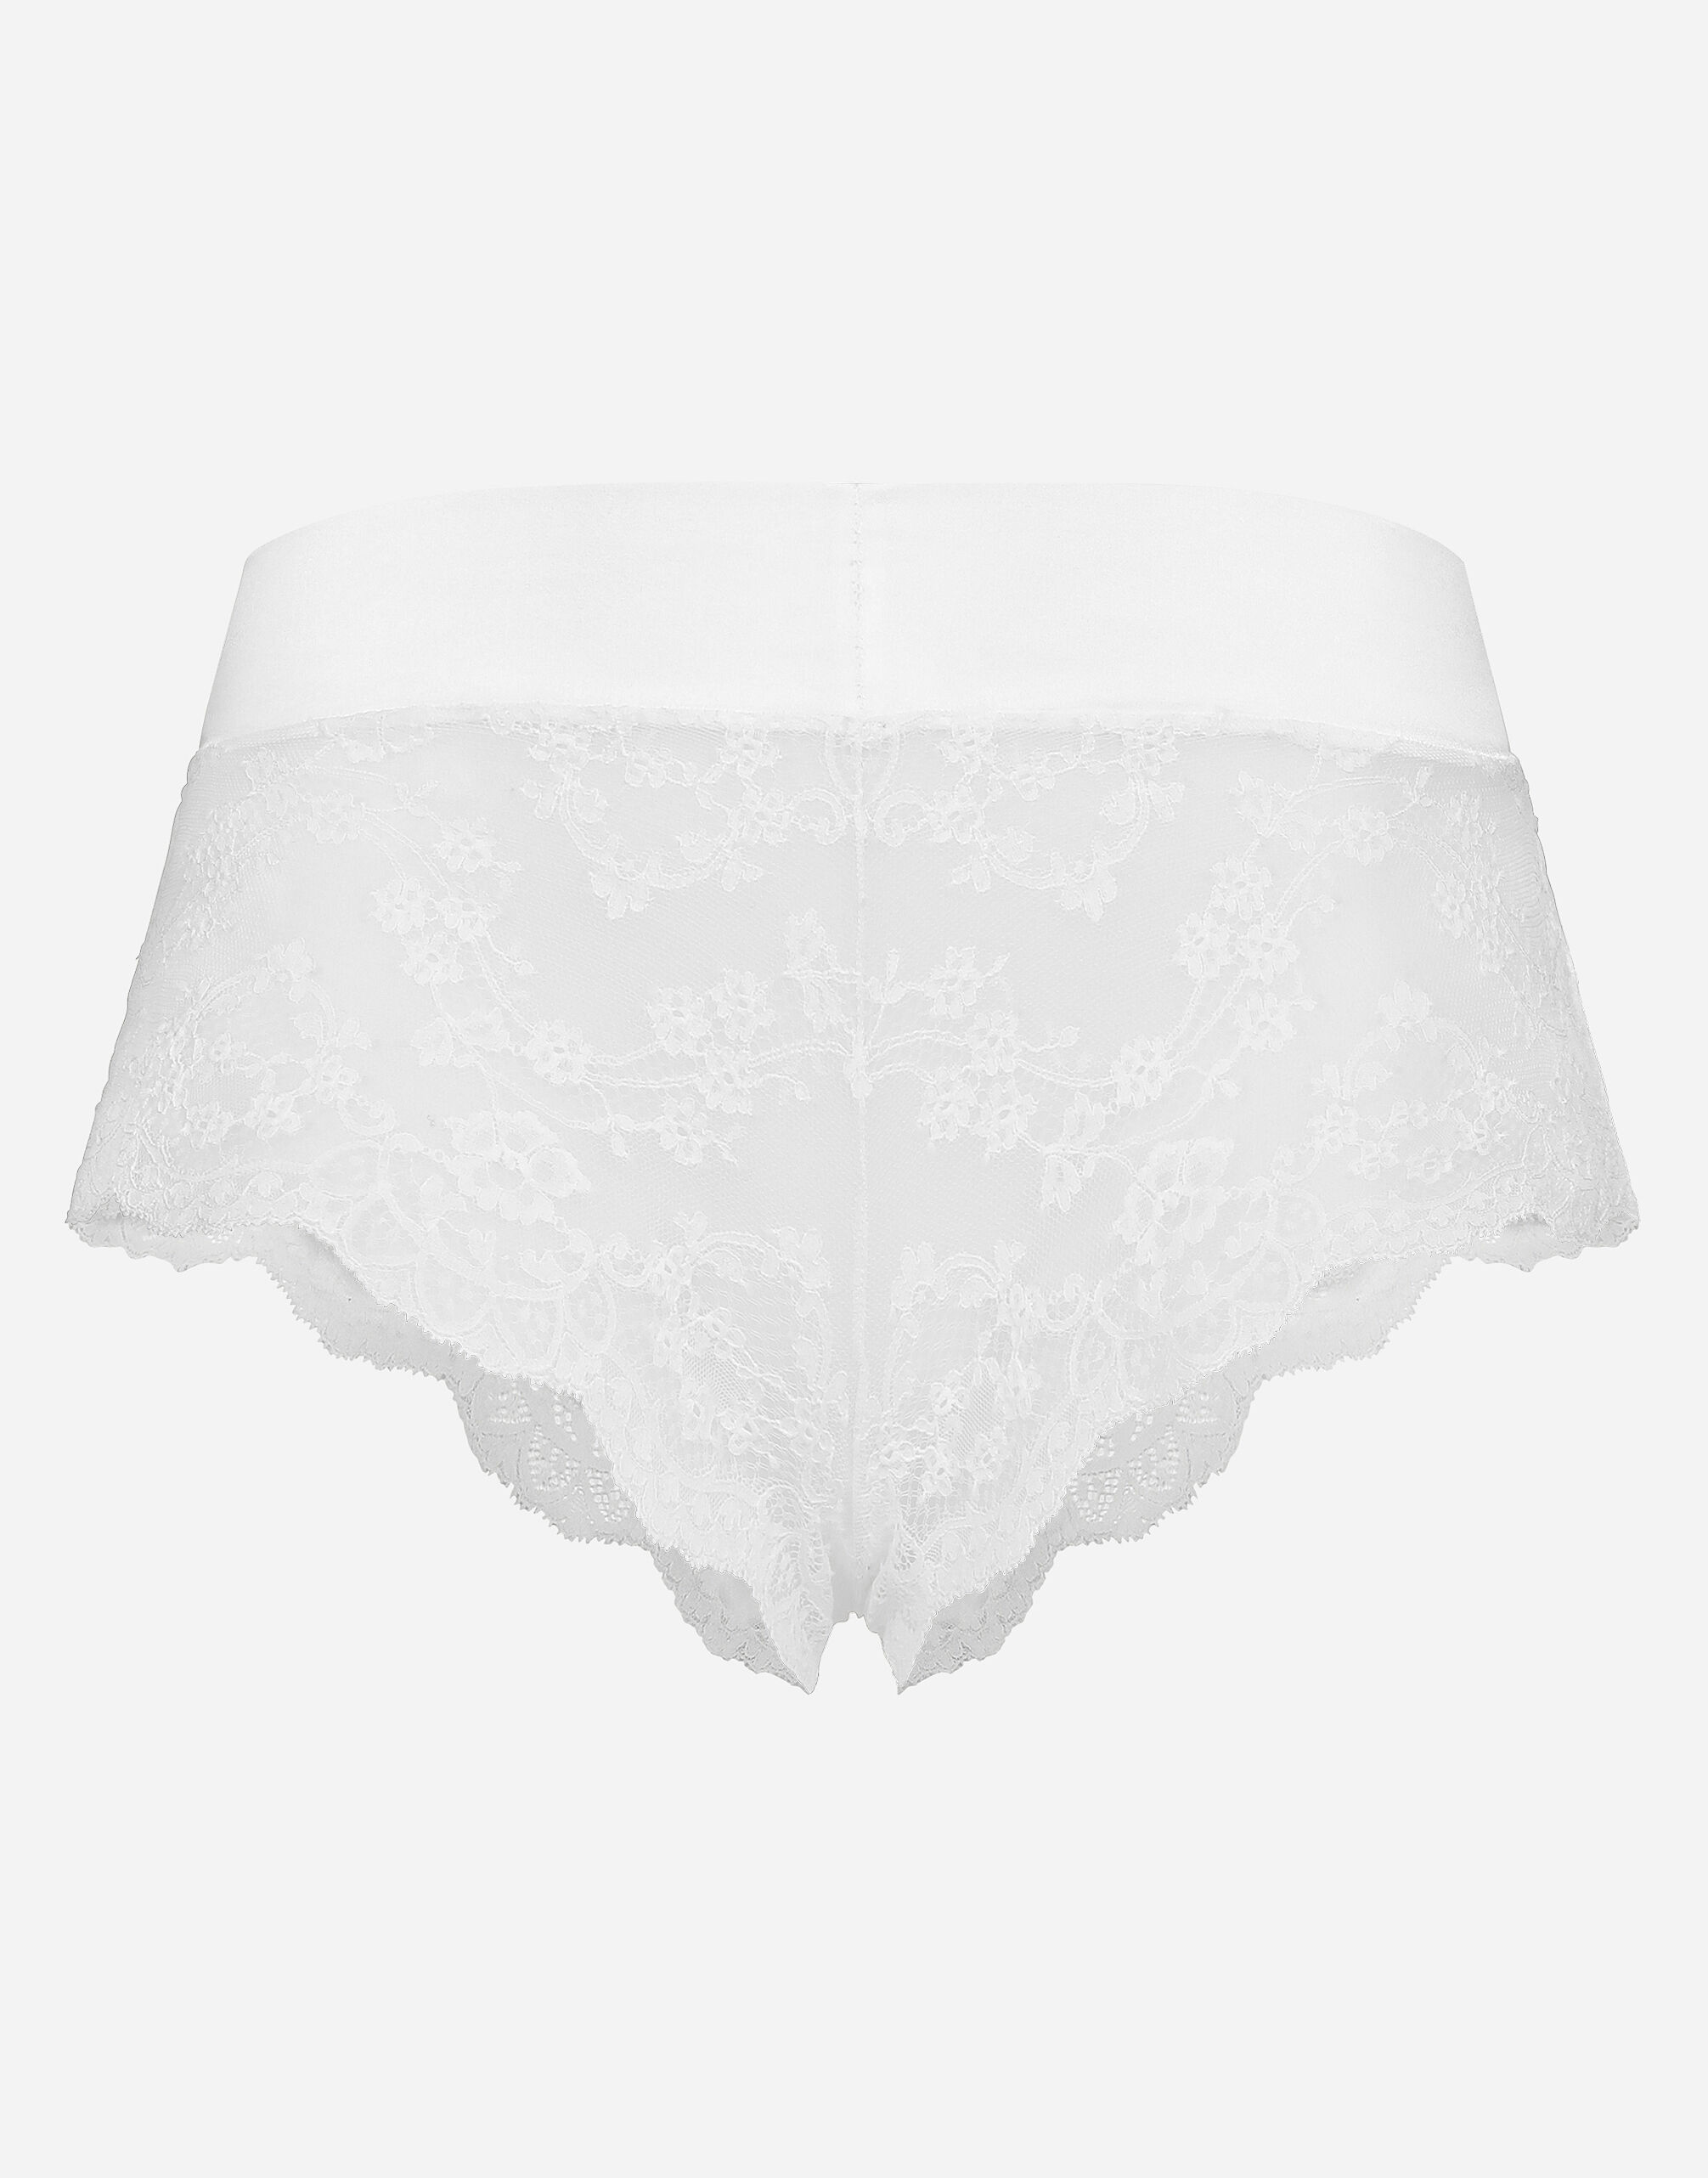 Dolce & Gabbana Lace high-waisted panties with satin waistband Print FN093RGDAWW